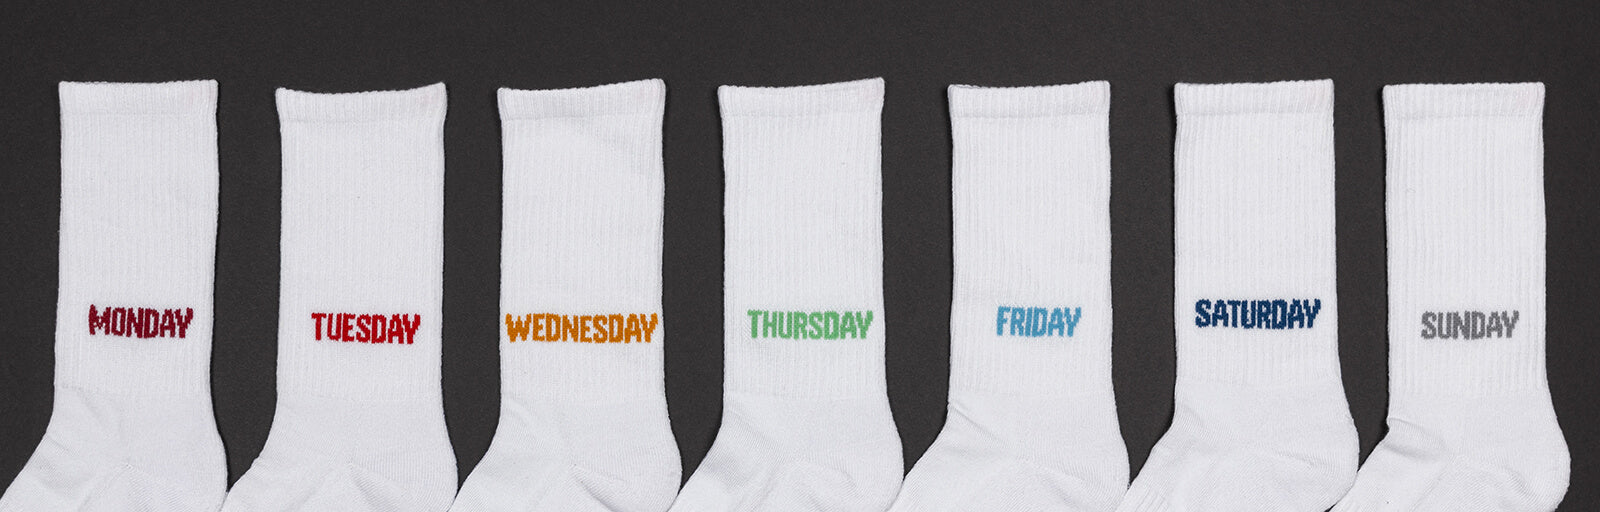 Socks for every day of the week, literally